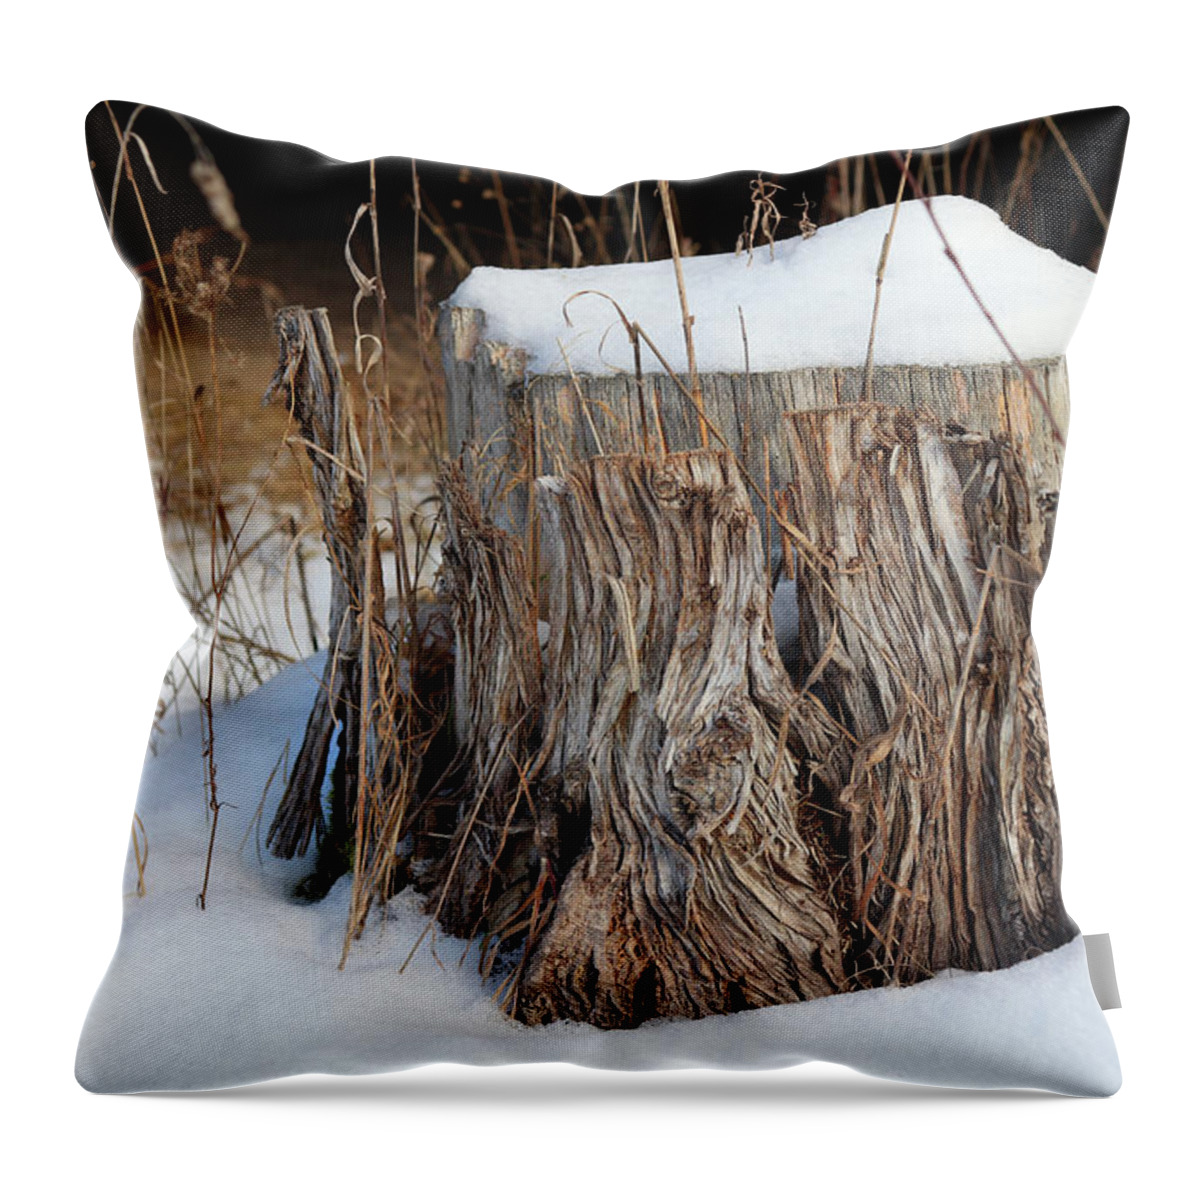 Tree Stump Throw Pillow featuring the photograph Winter Stump by David T Wilkinson